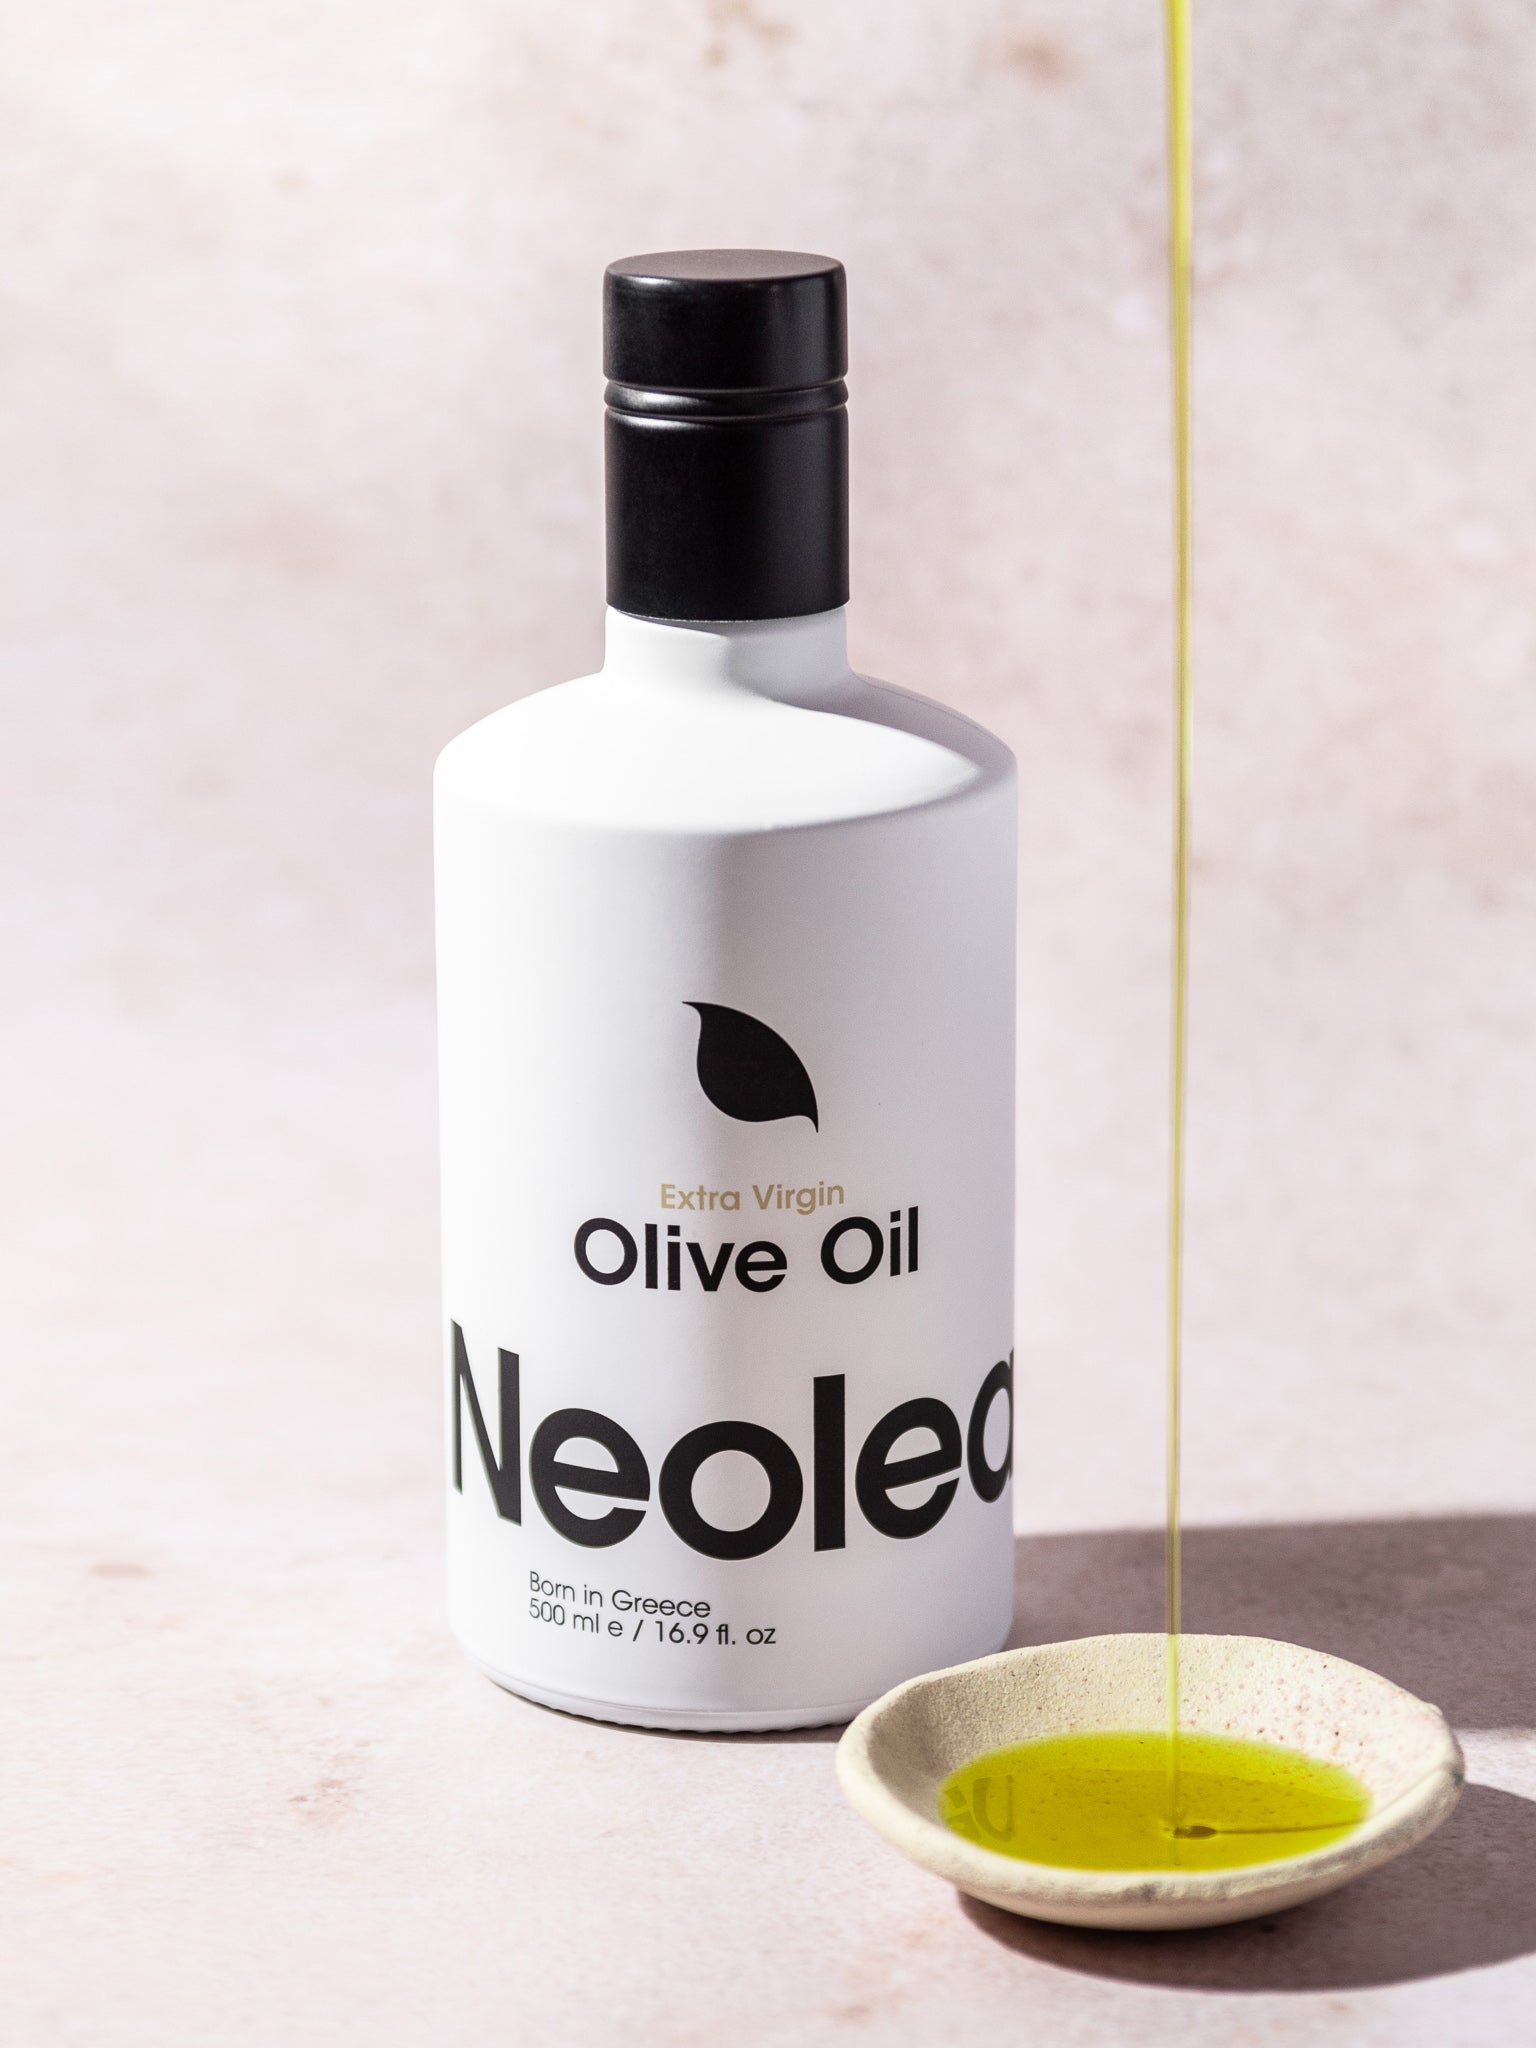 Huile d'olive vierge extra
